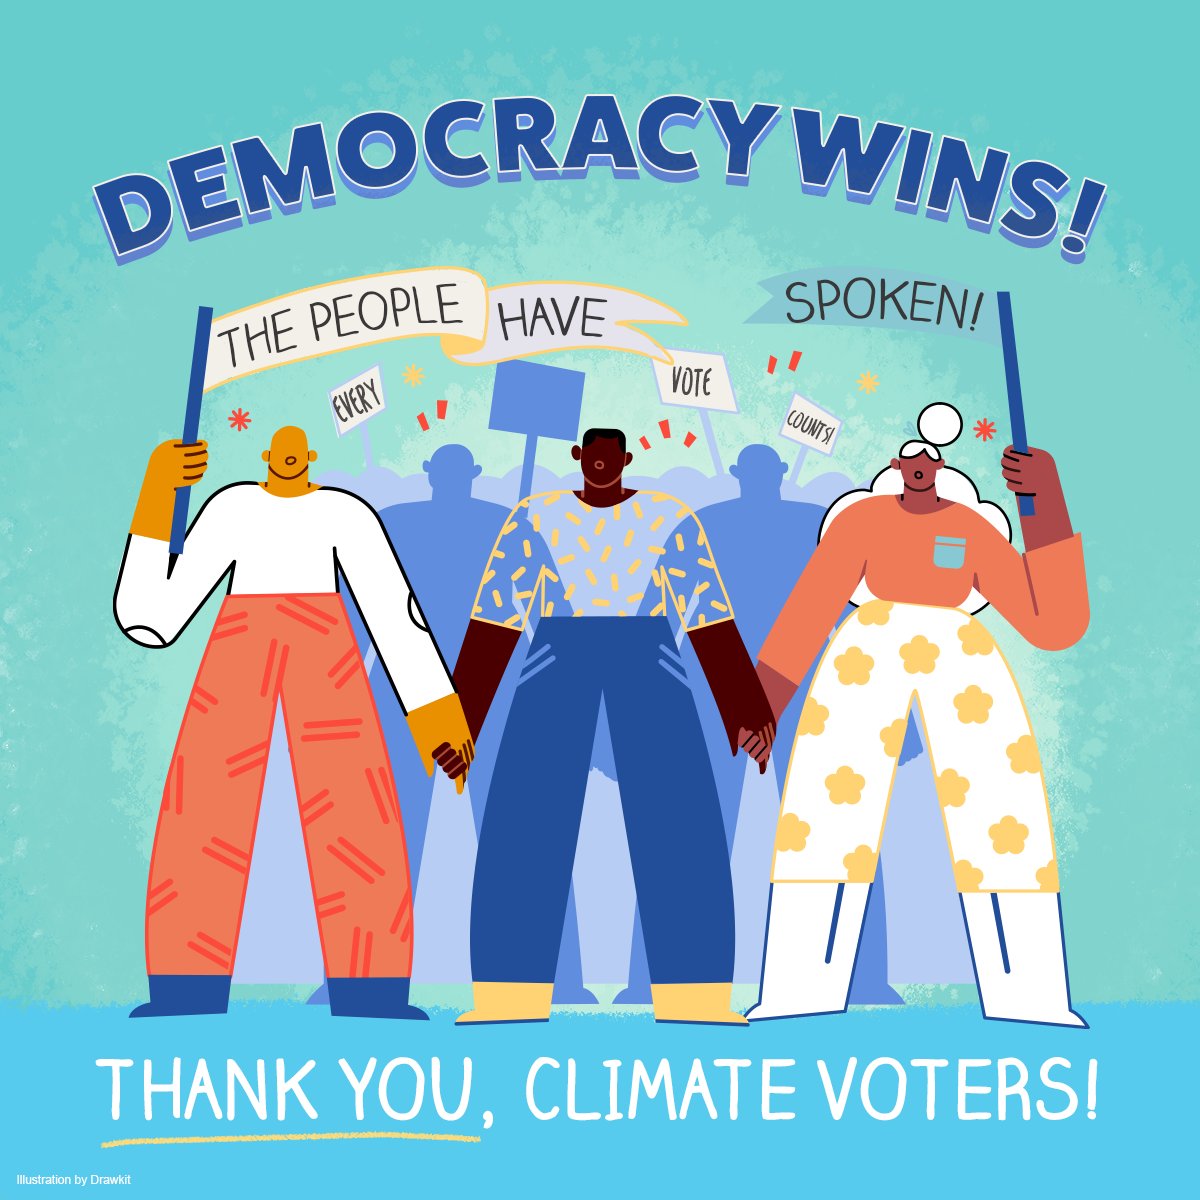 Climate voters — we did it. This is a win for human decency, science, love and compassion over hatred & fear, bridges not walls, empathy & inclusion over racism and violence. People power wins — and we’re just getting started.